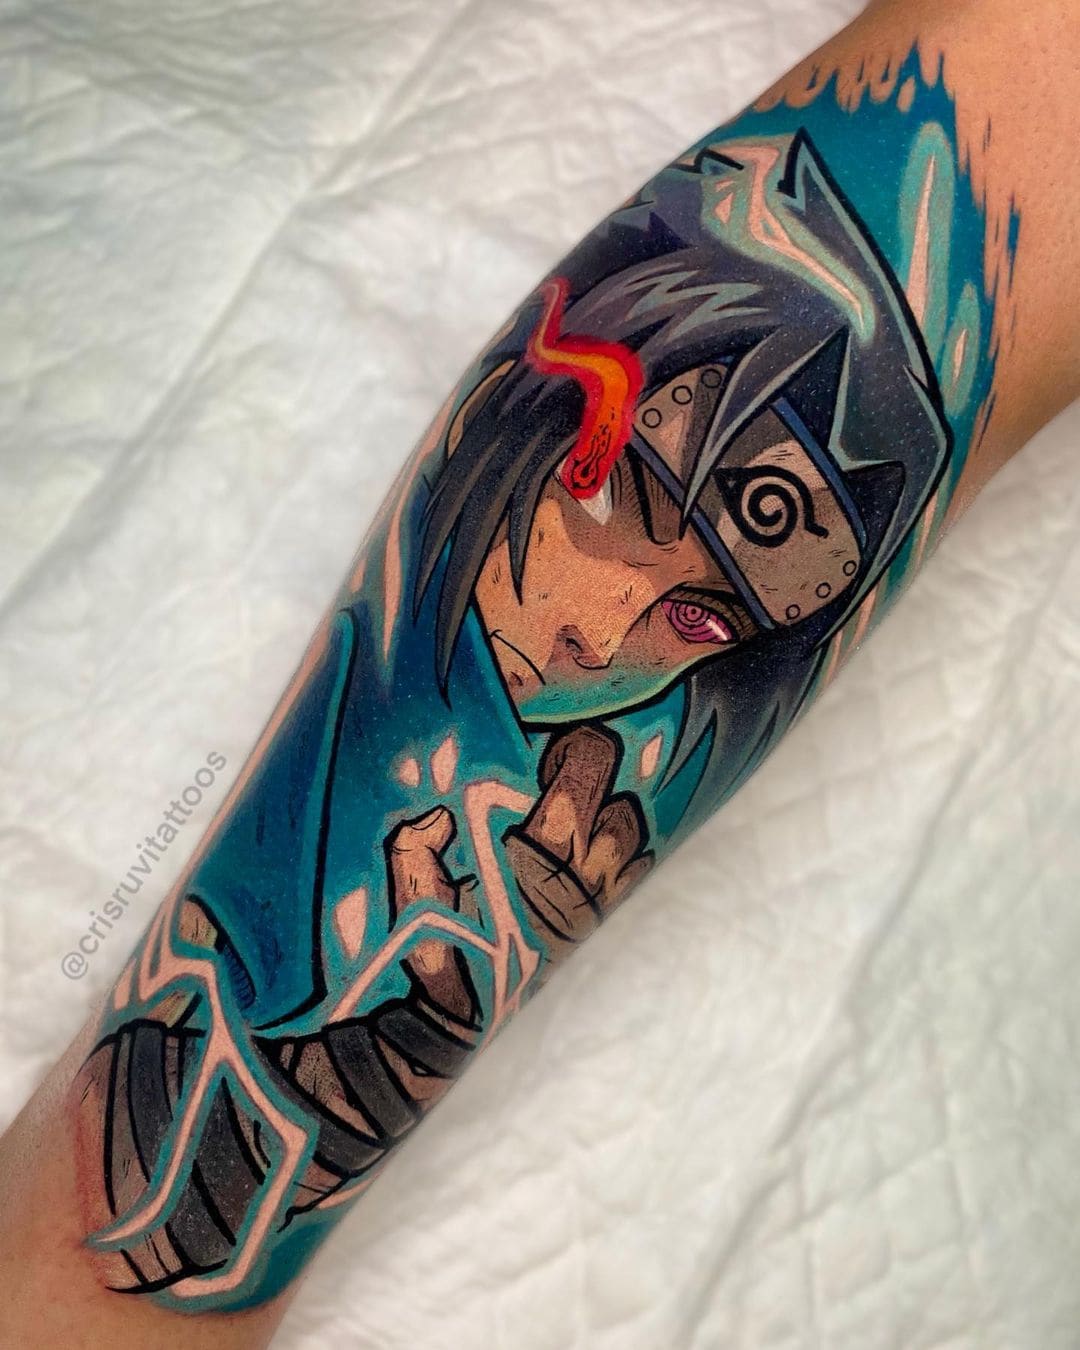 30+ Anime Tattoo Design Ideas Featuring Iconic Characters - 100 Tattoos